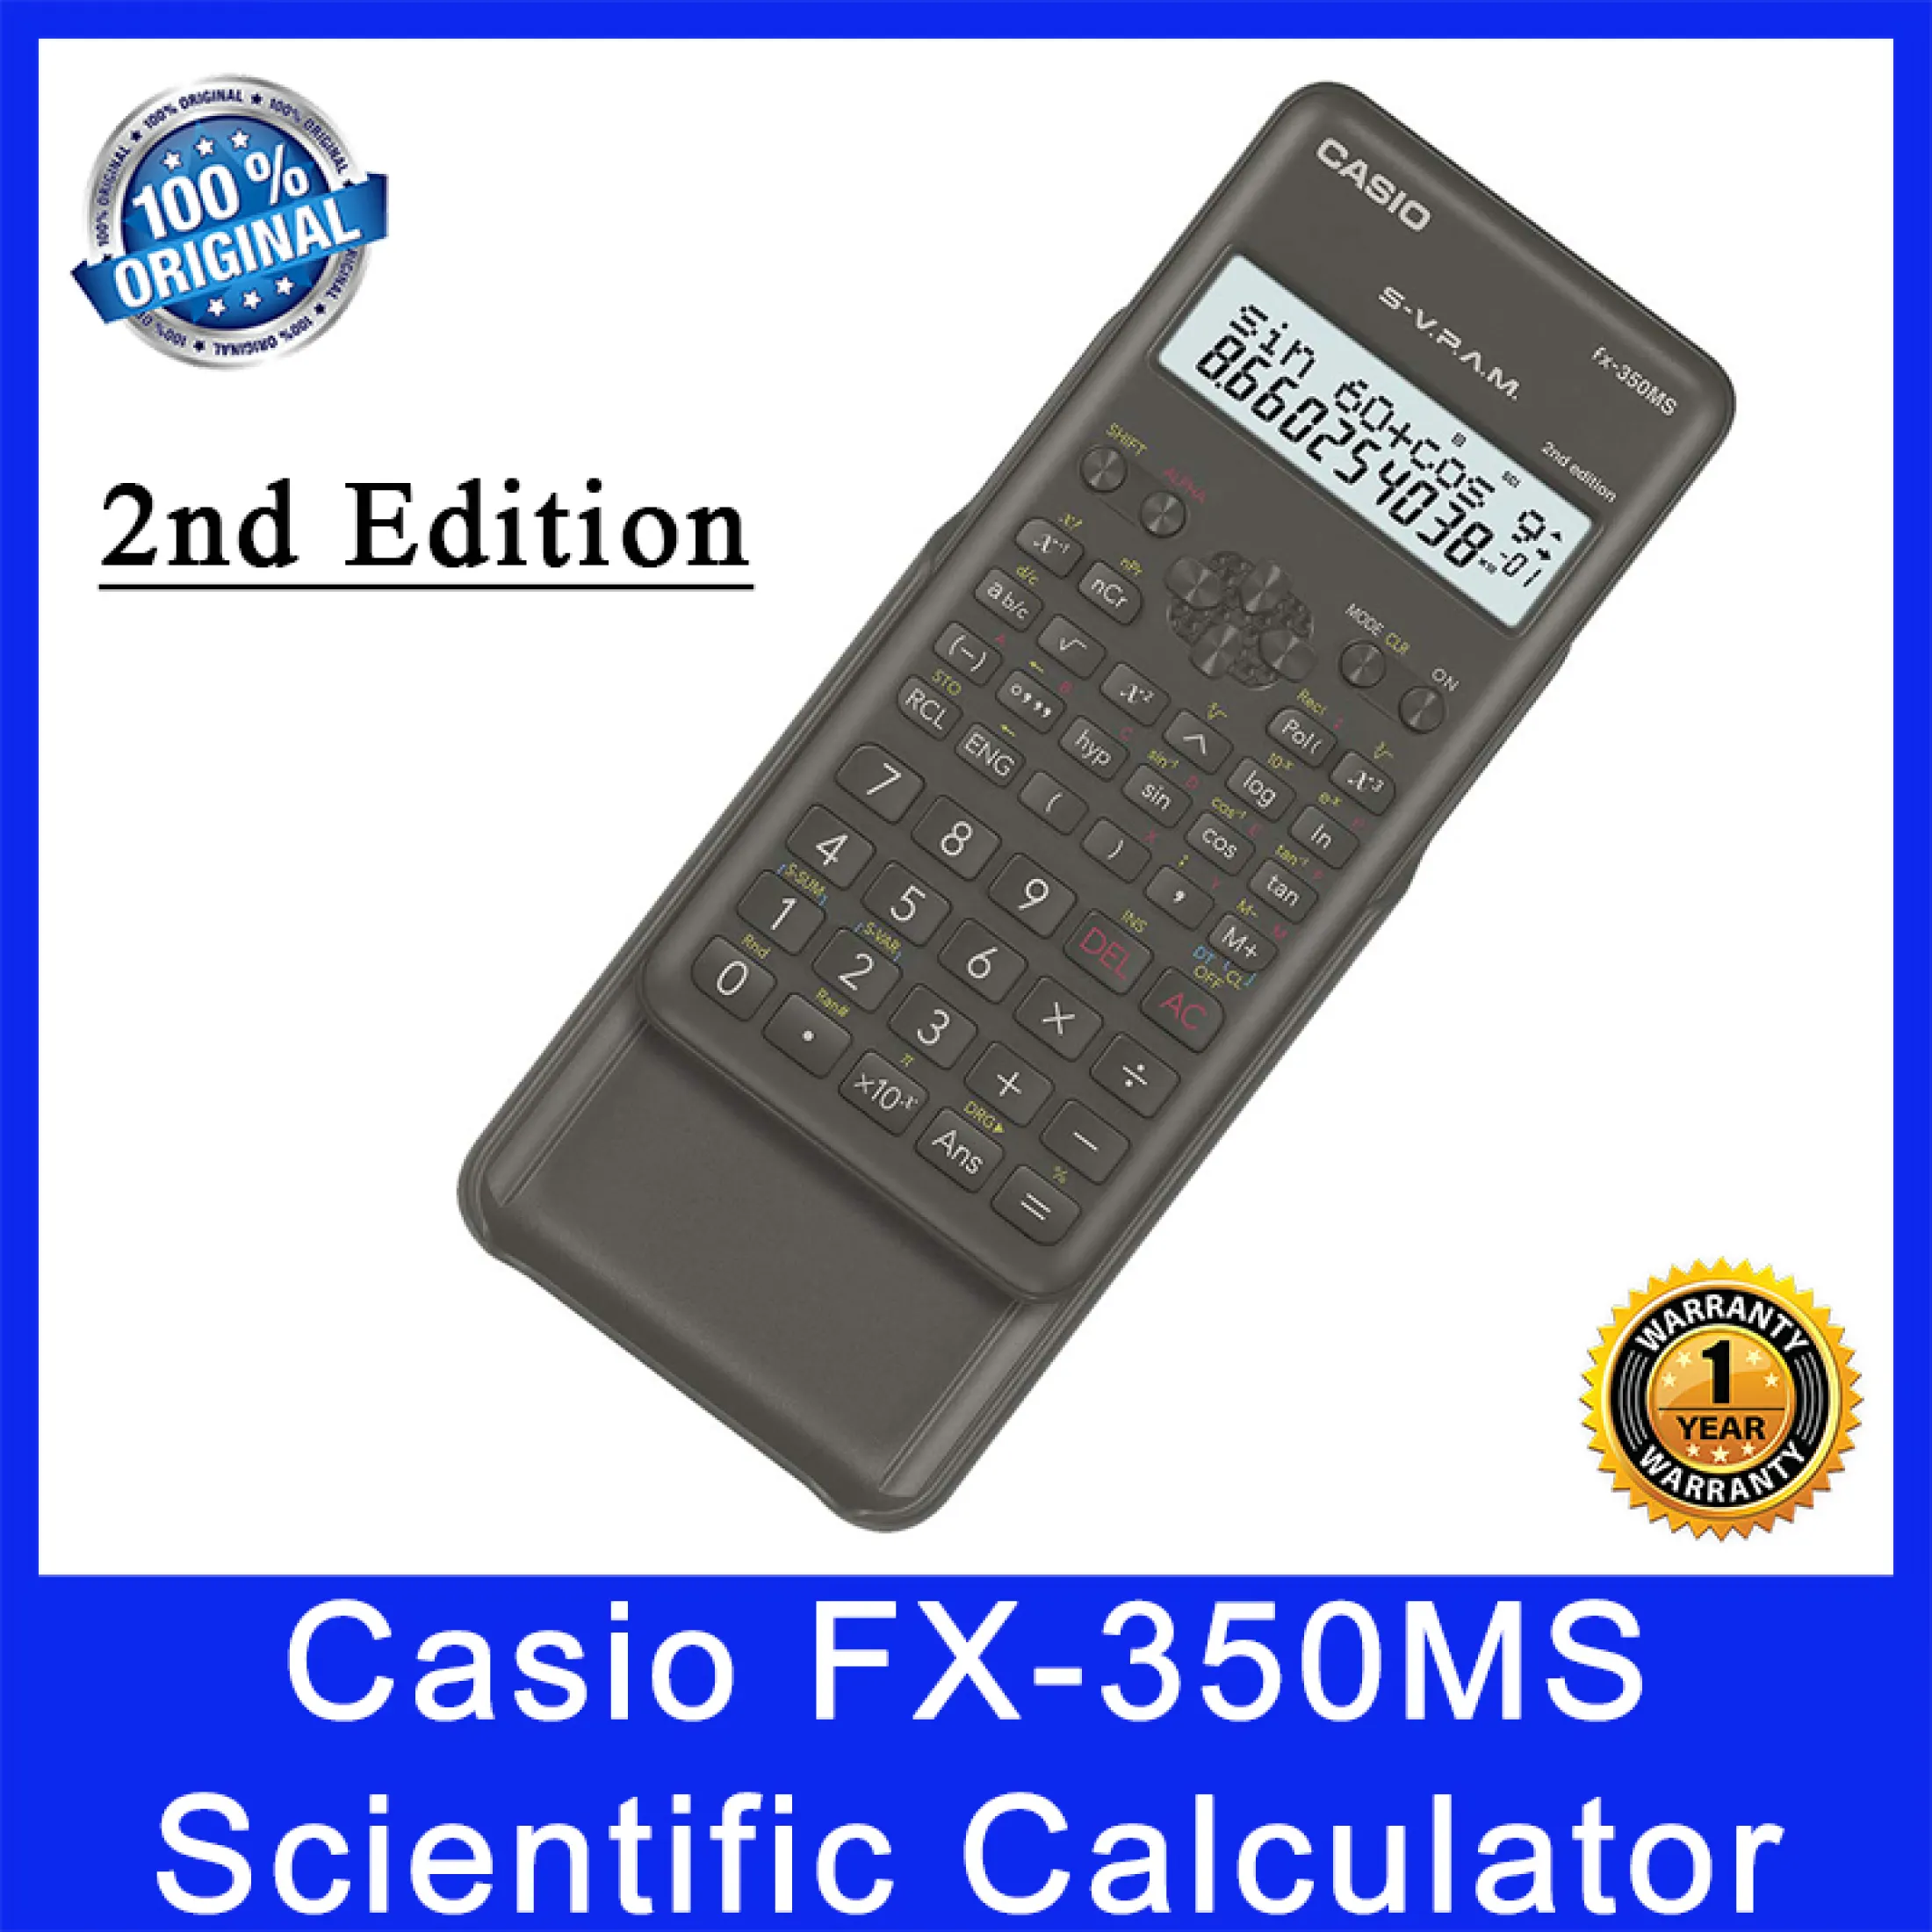 Casio Fx 350ms Scientific Calculator New Second Edition Casio Fx350ms Scientific Calculator 240 Functions Uses Lr44 Battery Dot Matrix Display Comes With Slide On Hard Case Original Casio Product Local Sg Seller 1